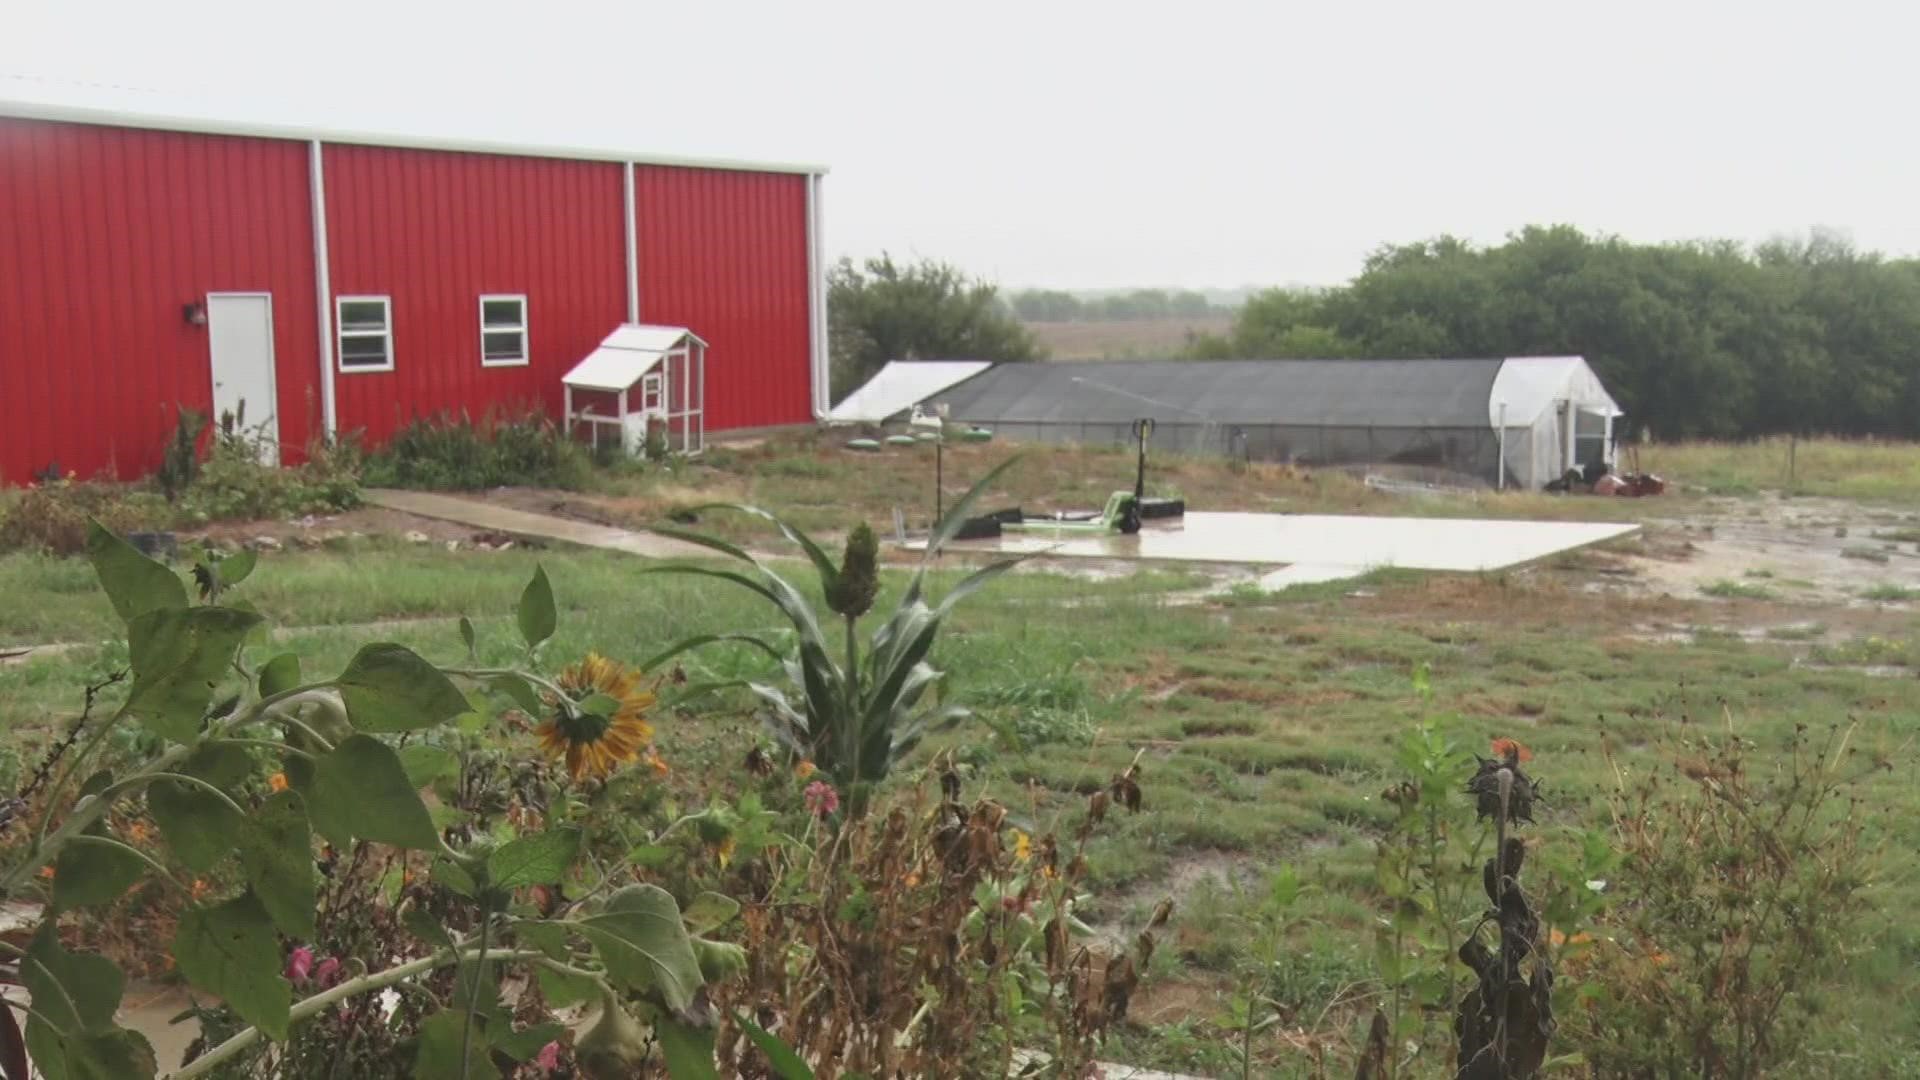 Charles Mikeska, owner of The Farmery, has been dealing with drought conditions despite the recent rain.